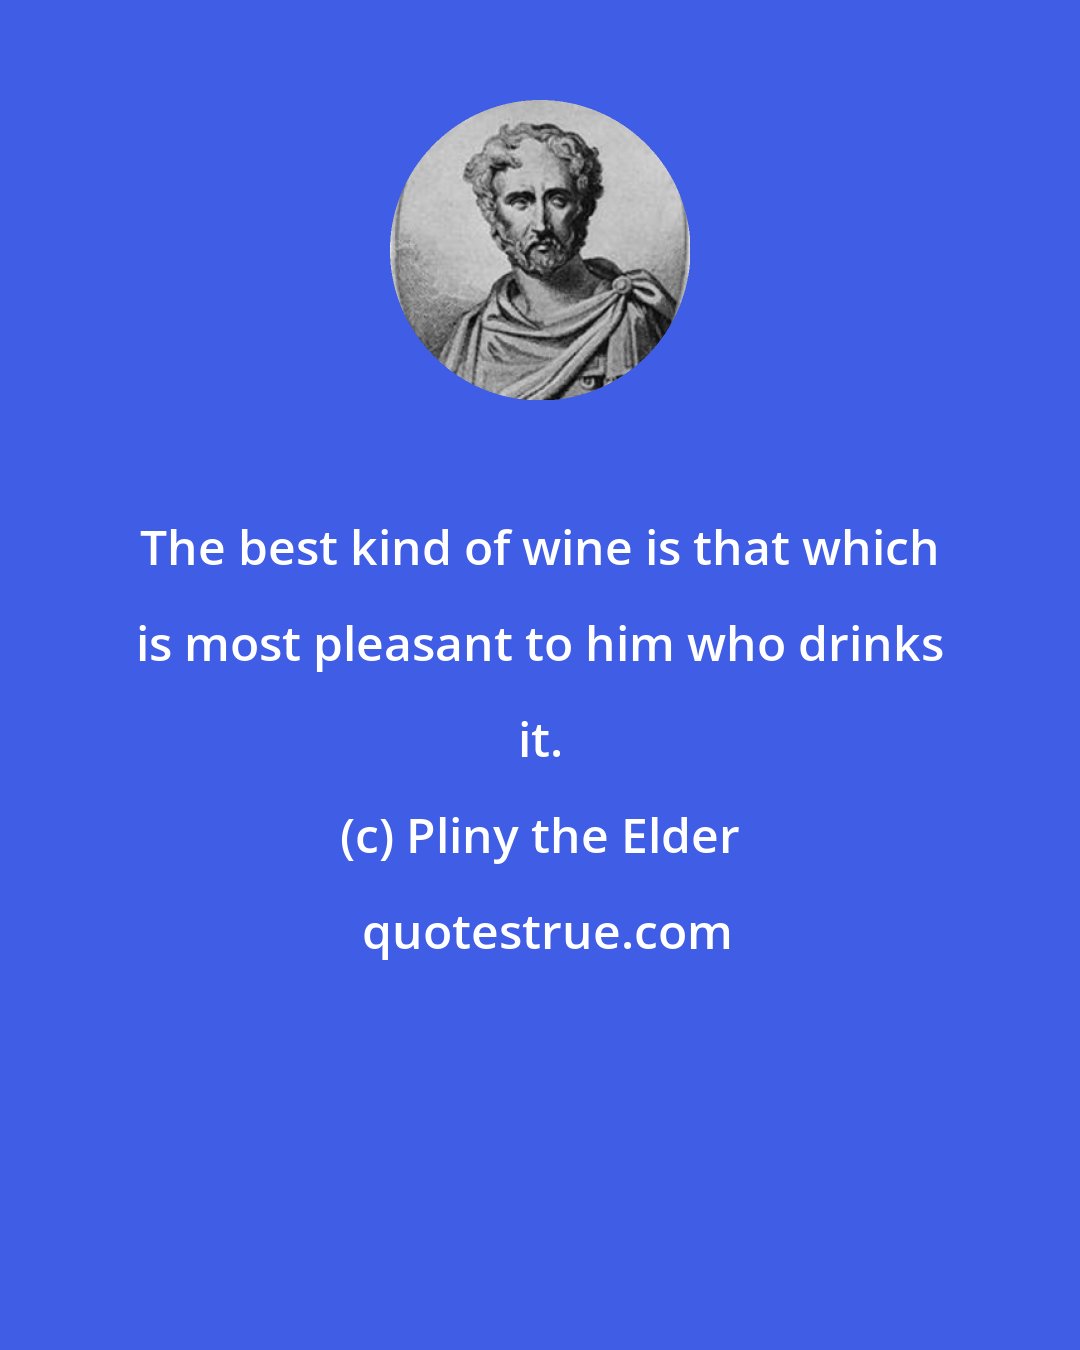 Pliny the Elder: The best kind of wine is that which is most pleasant to him who drinks it.